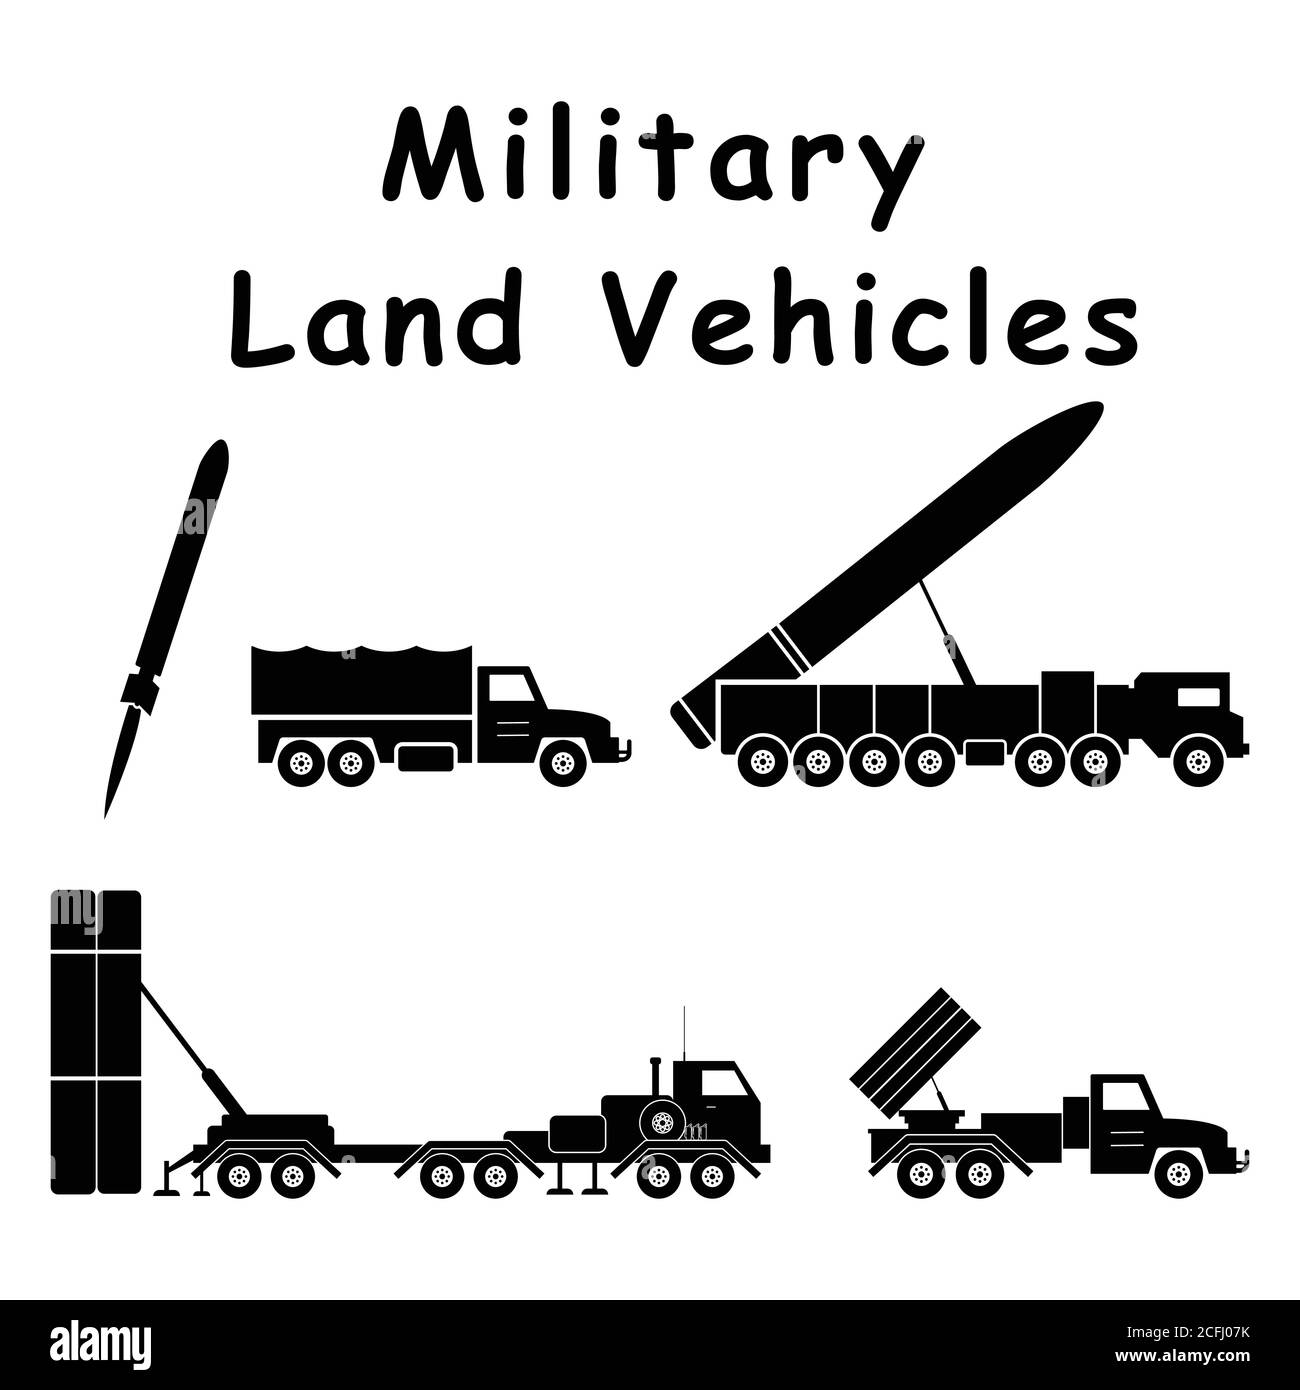 Military Land Combat Artillery Vehicles. Pictogram depicting ground war machines and equipment. EPS Vector Stock Vector